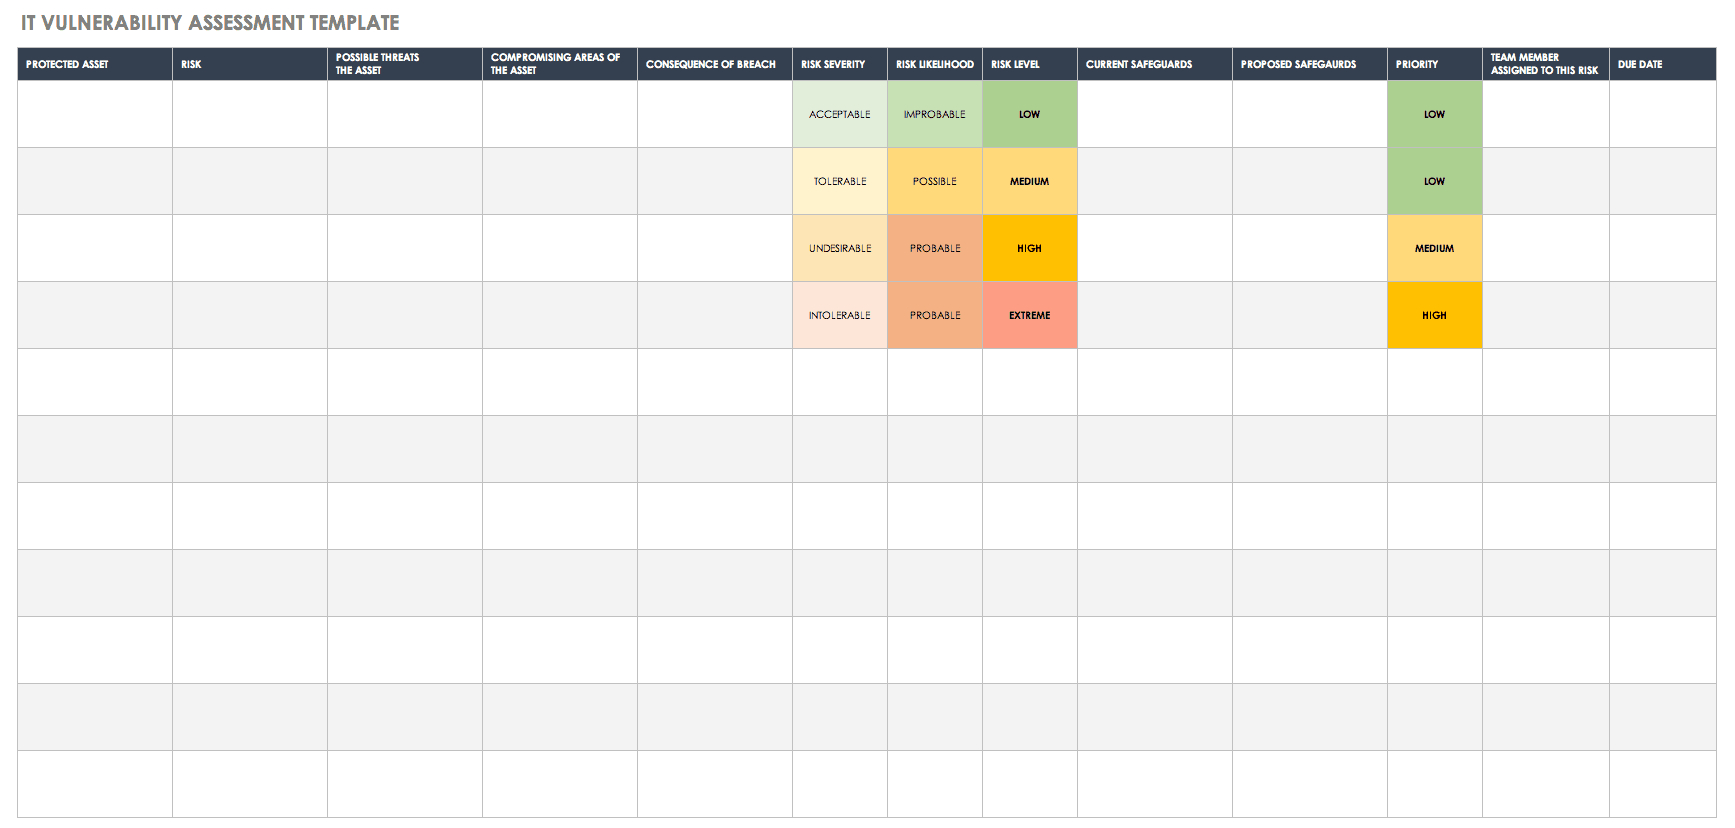 Free Vulnerability Assessment Templates | Smartsheet With Regard To Physical Security Report Template